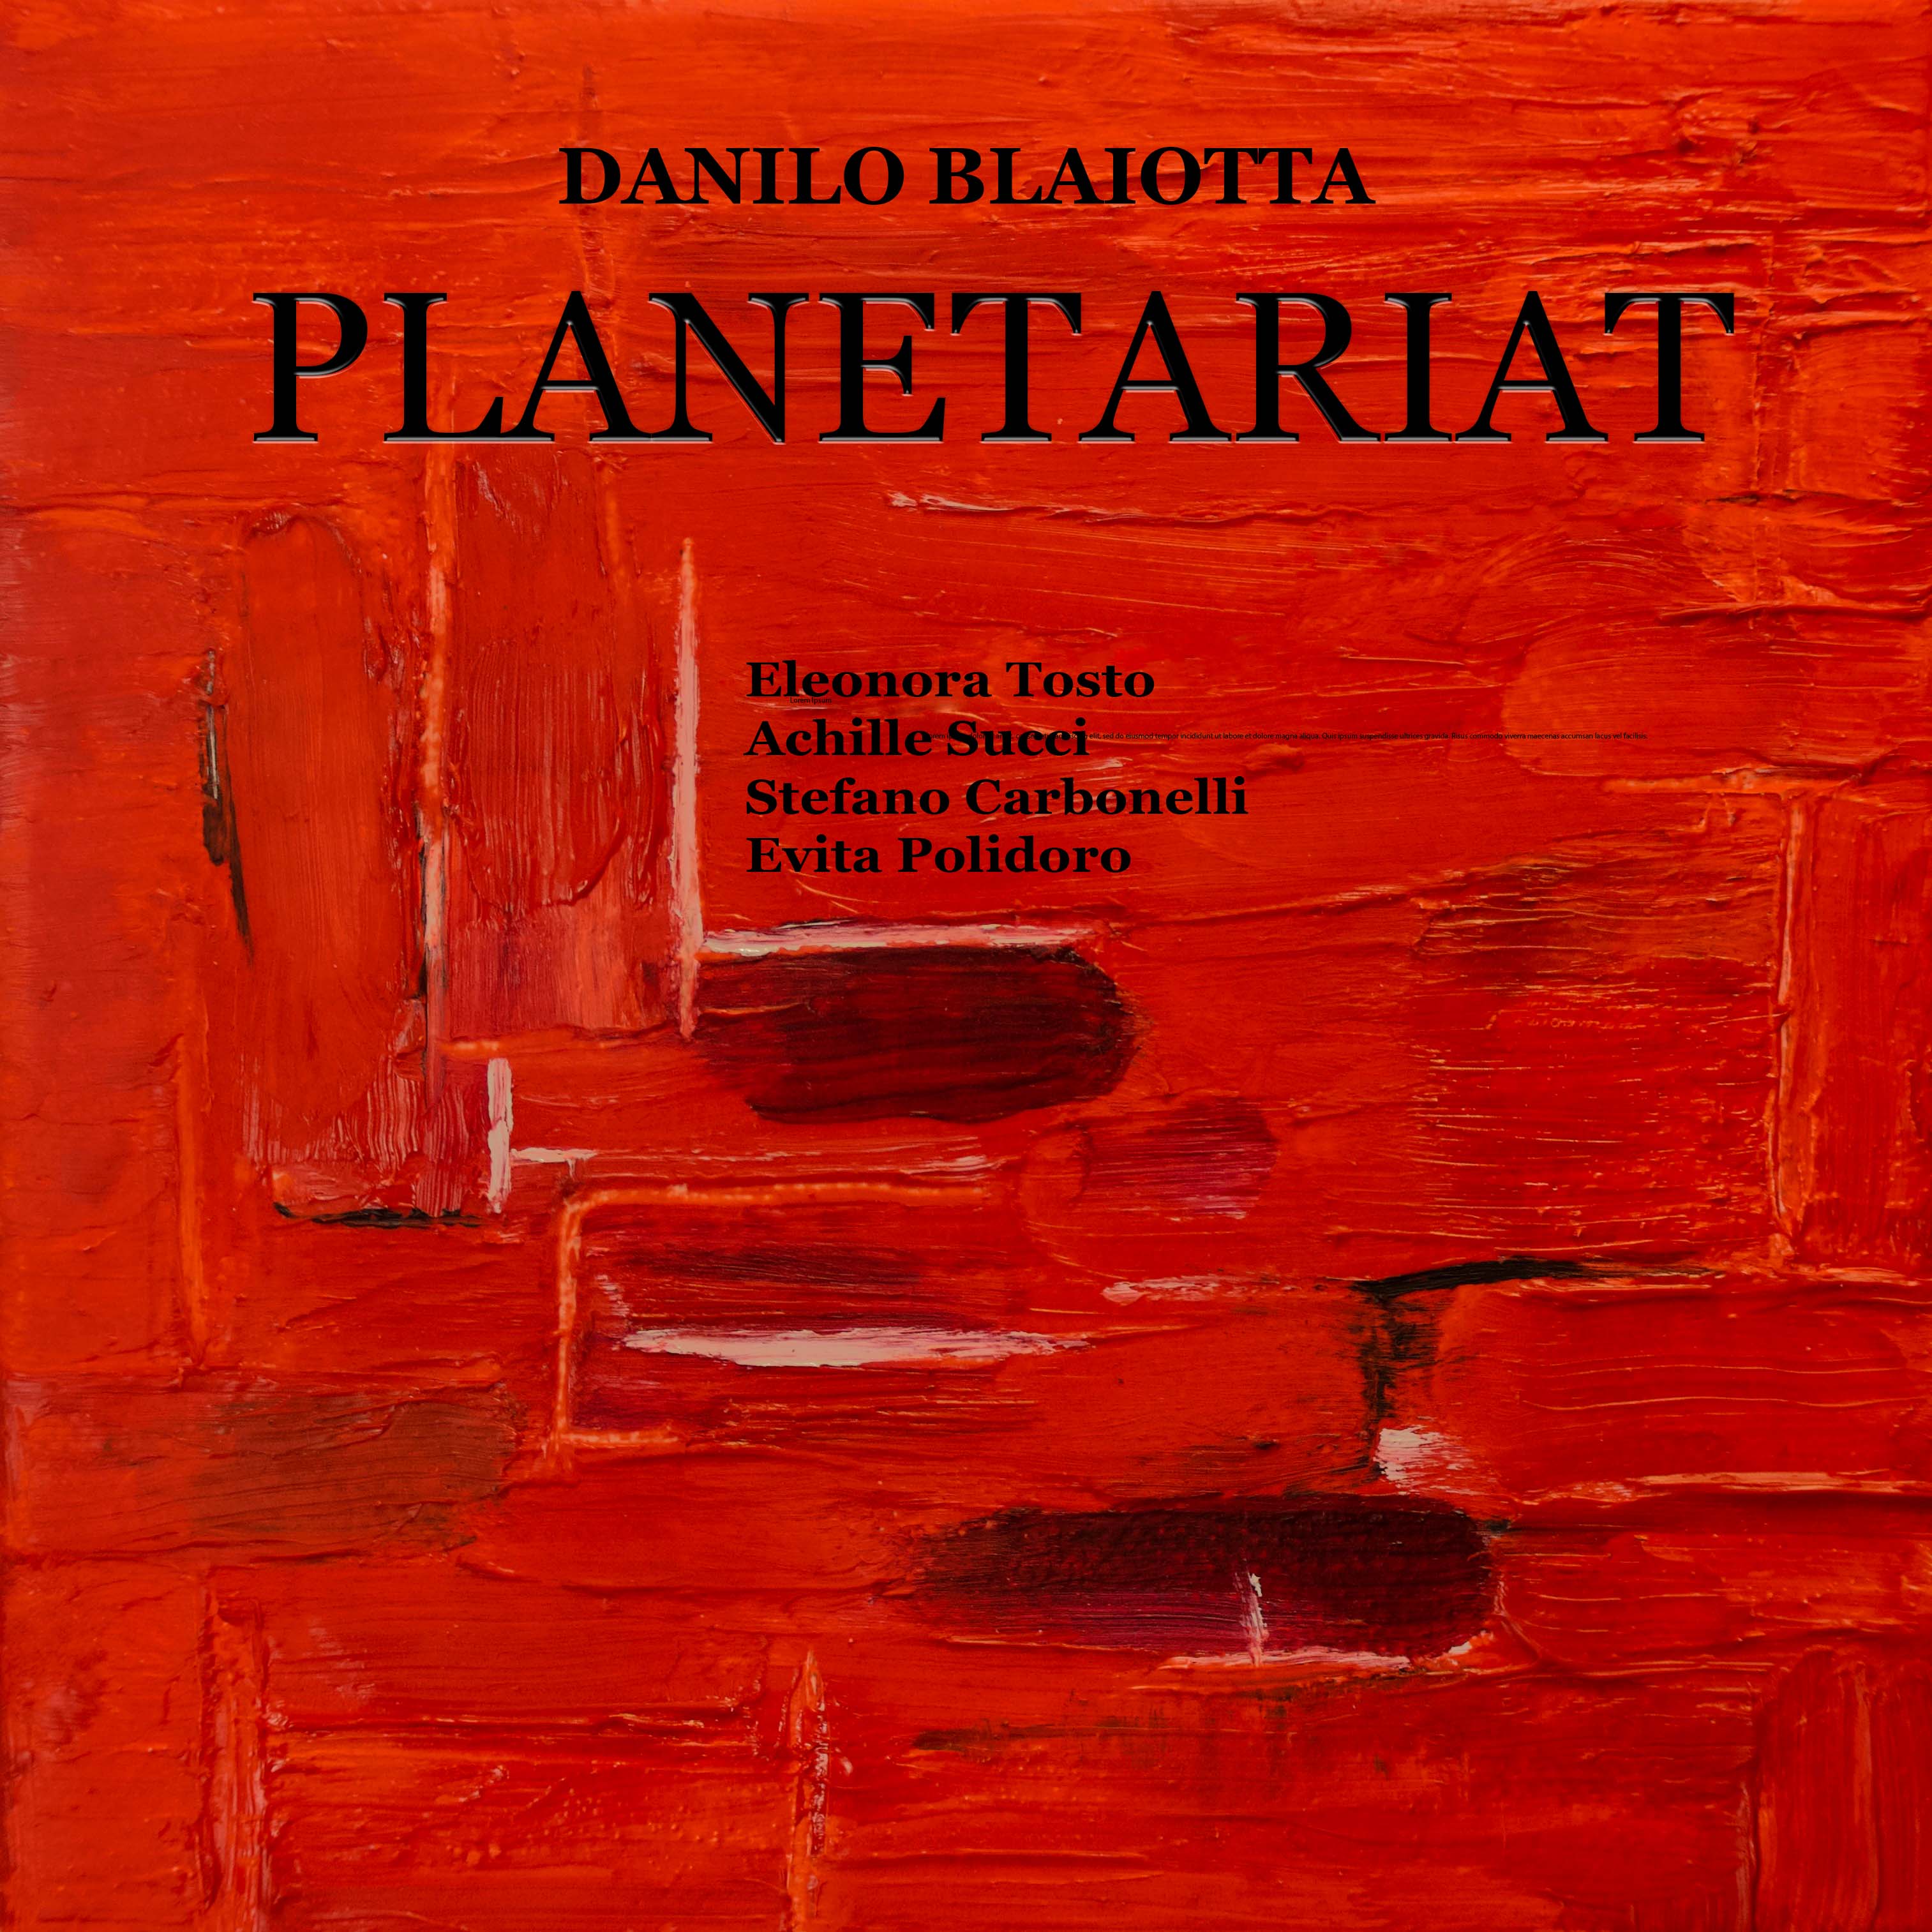 PLANETARIAT! New Album Out Today!